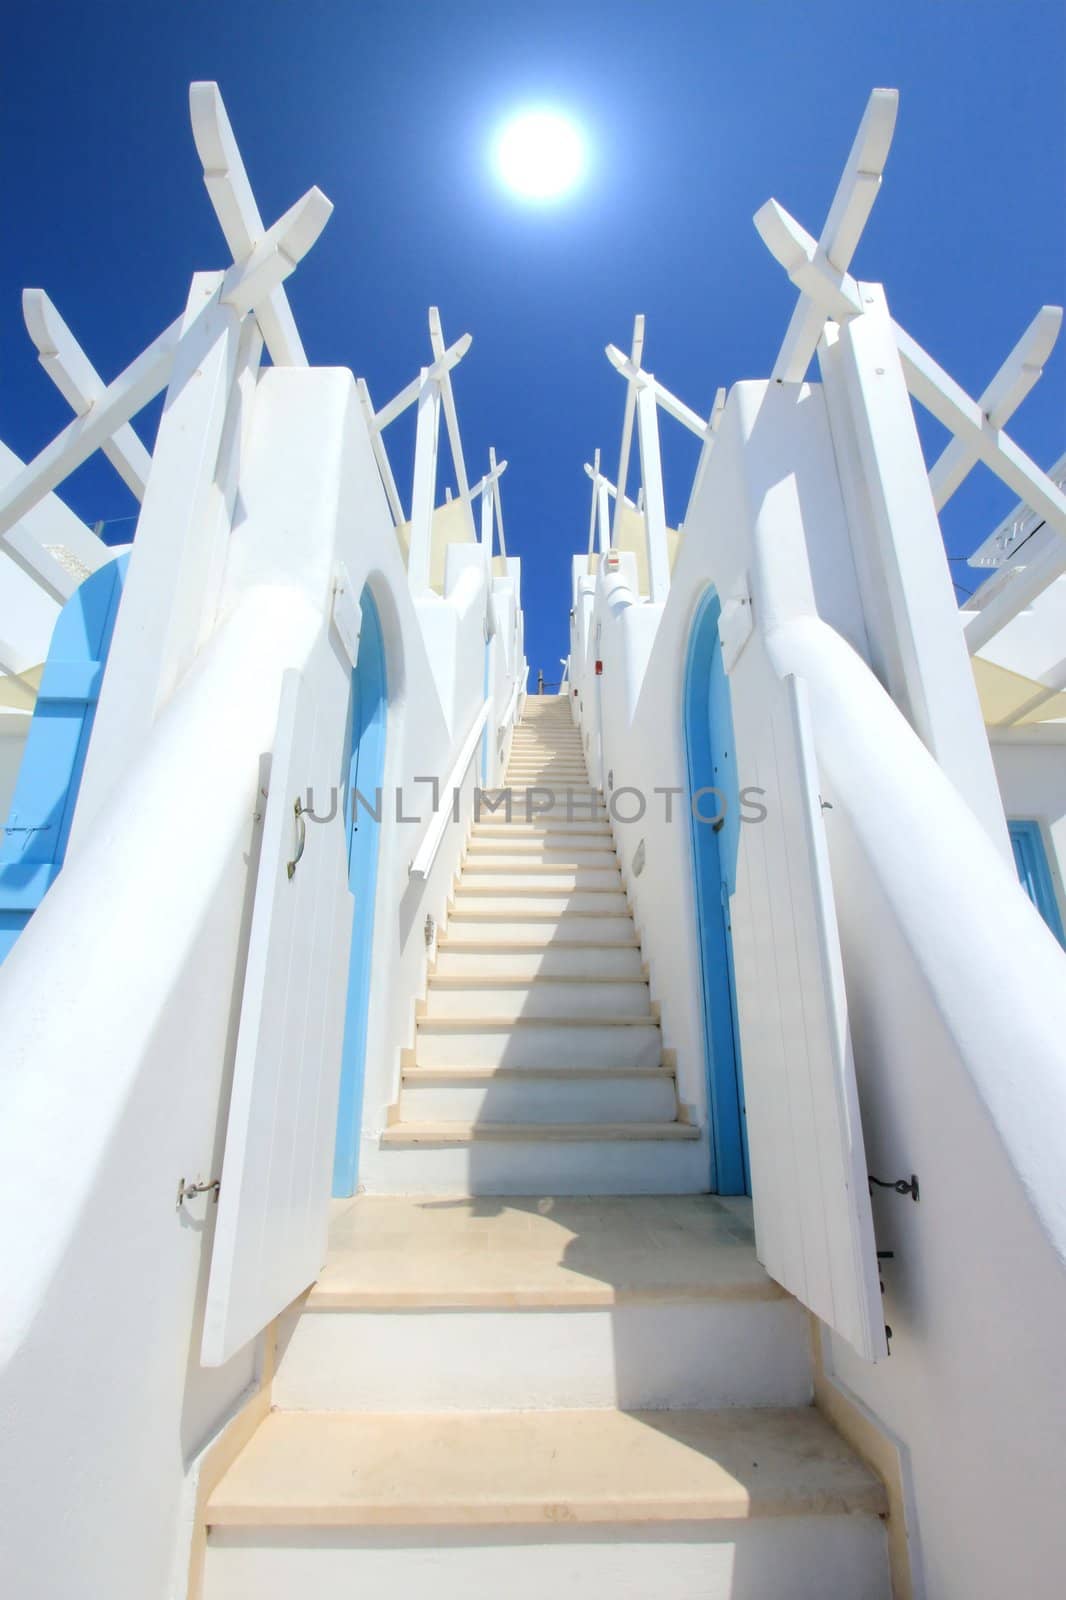 Beautiful colorful stairs with two walls going to the sun in deep blue sky